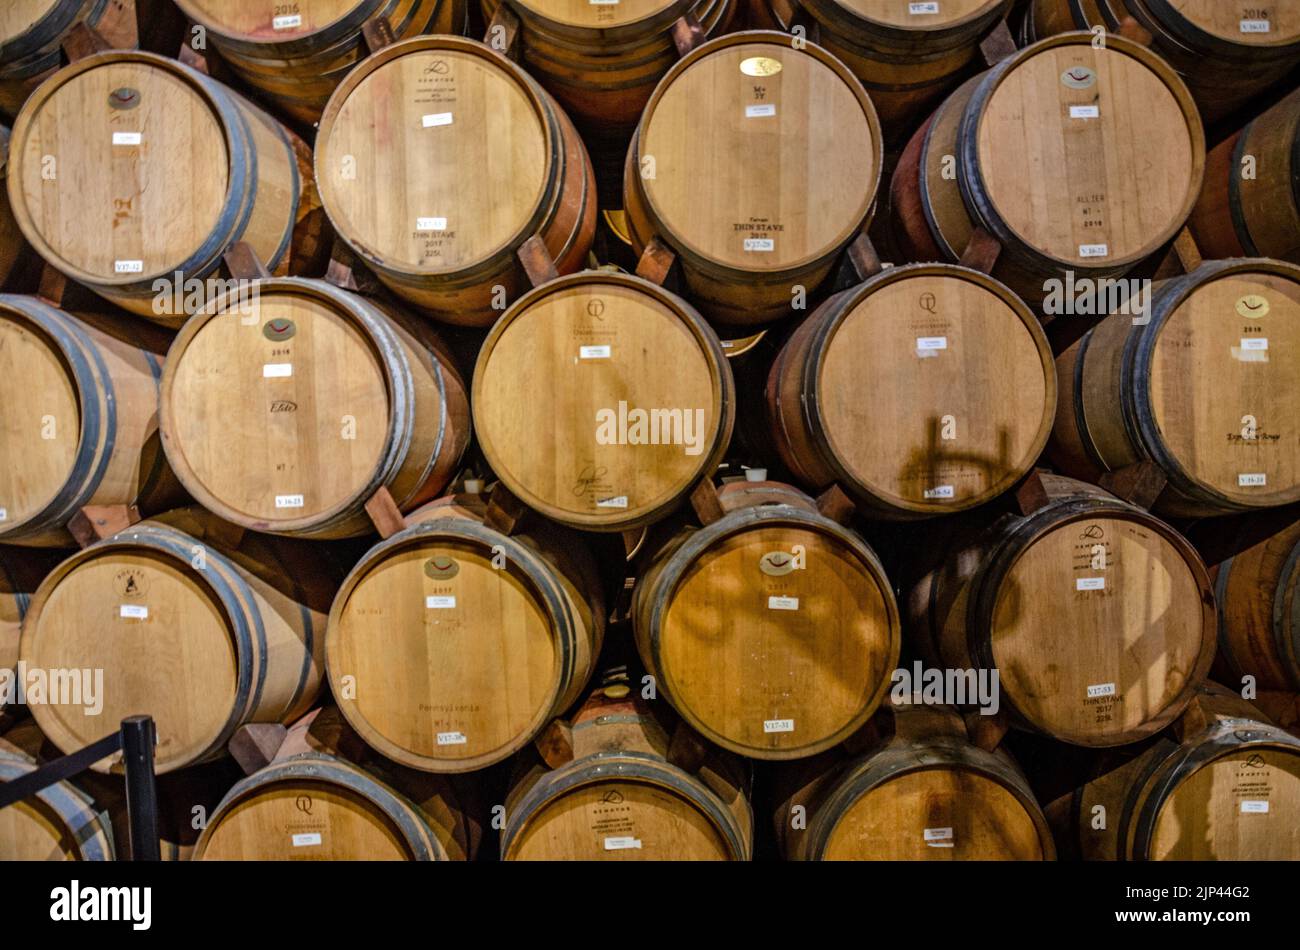 Oak barrels filled with ageing wine at a winery in The Napa Valley, California, USA Stock Photo